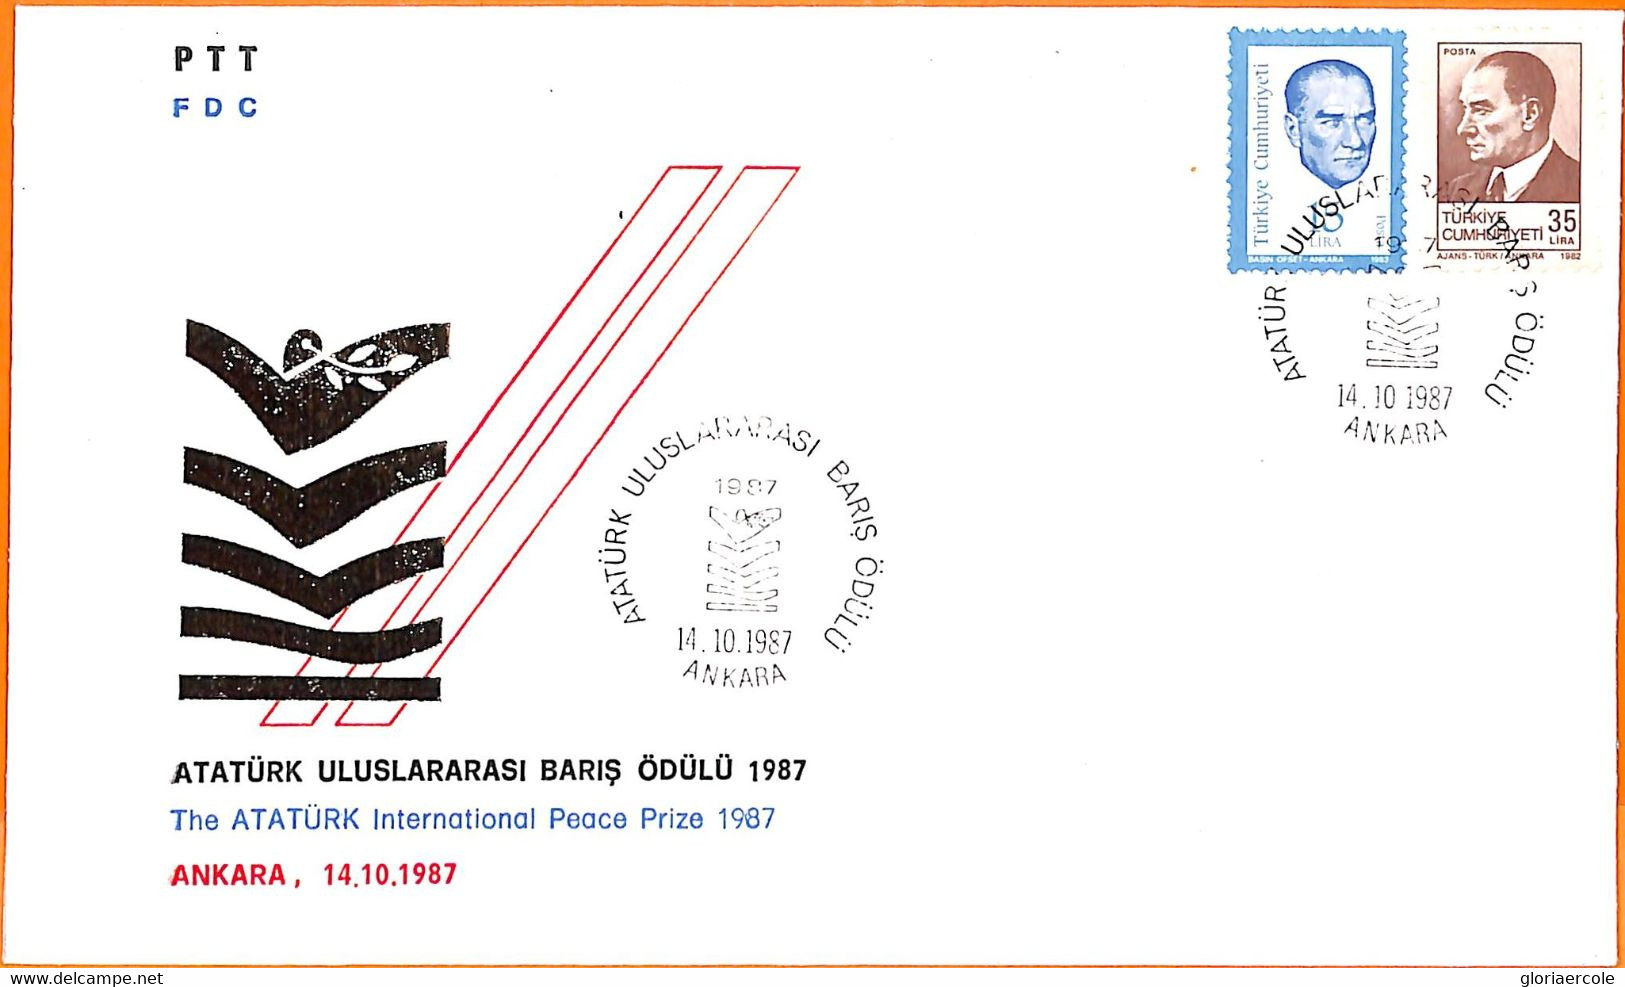 99921  - TURKEY  - POSTAL HISTORY - FDC COVER  1987 - Lettres & Documents